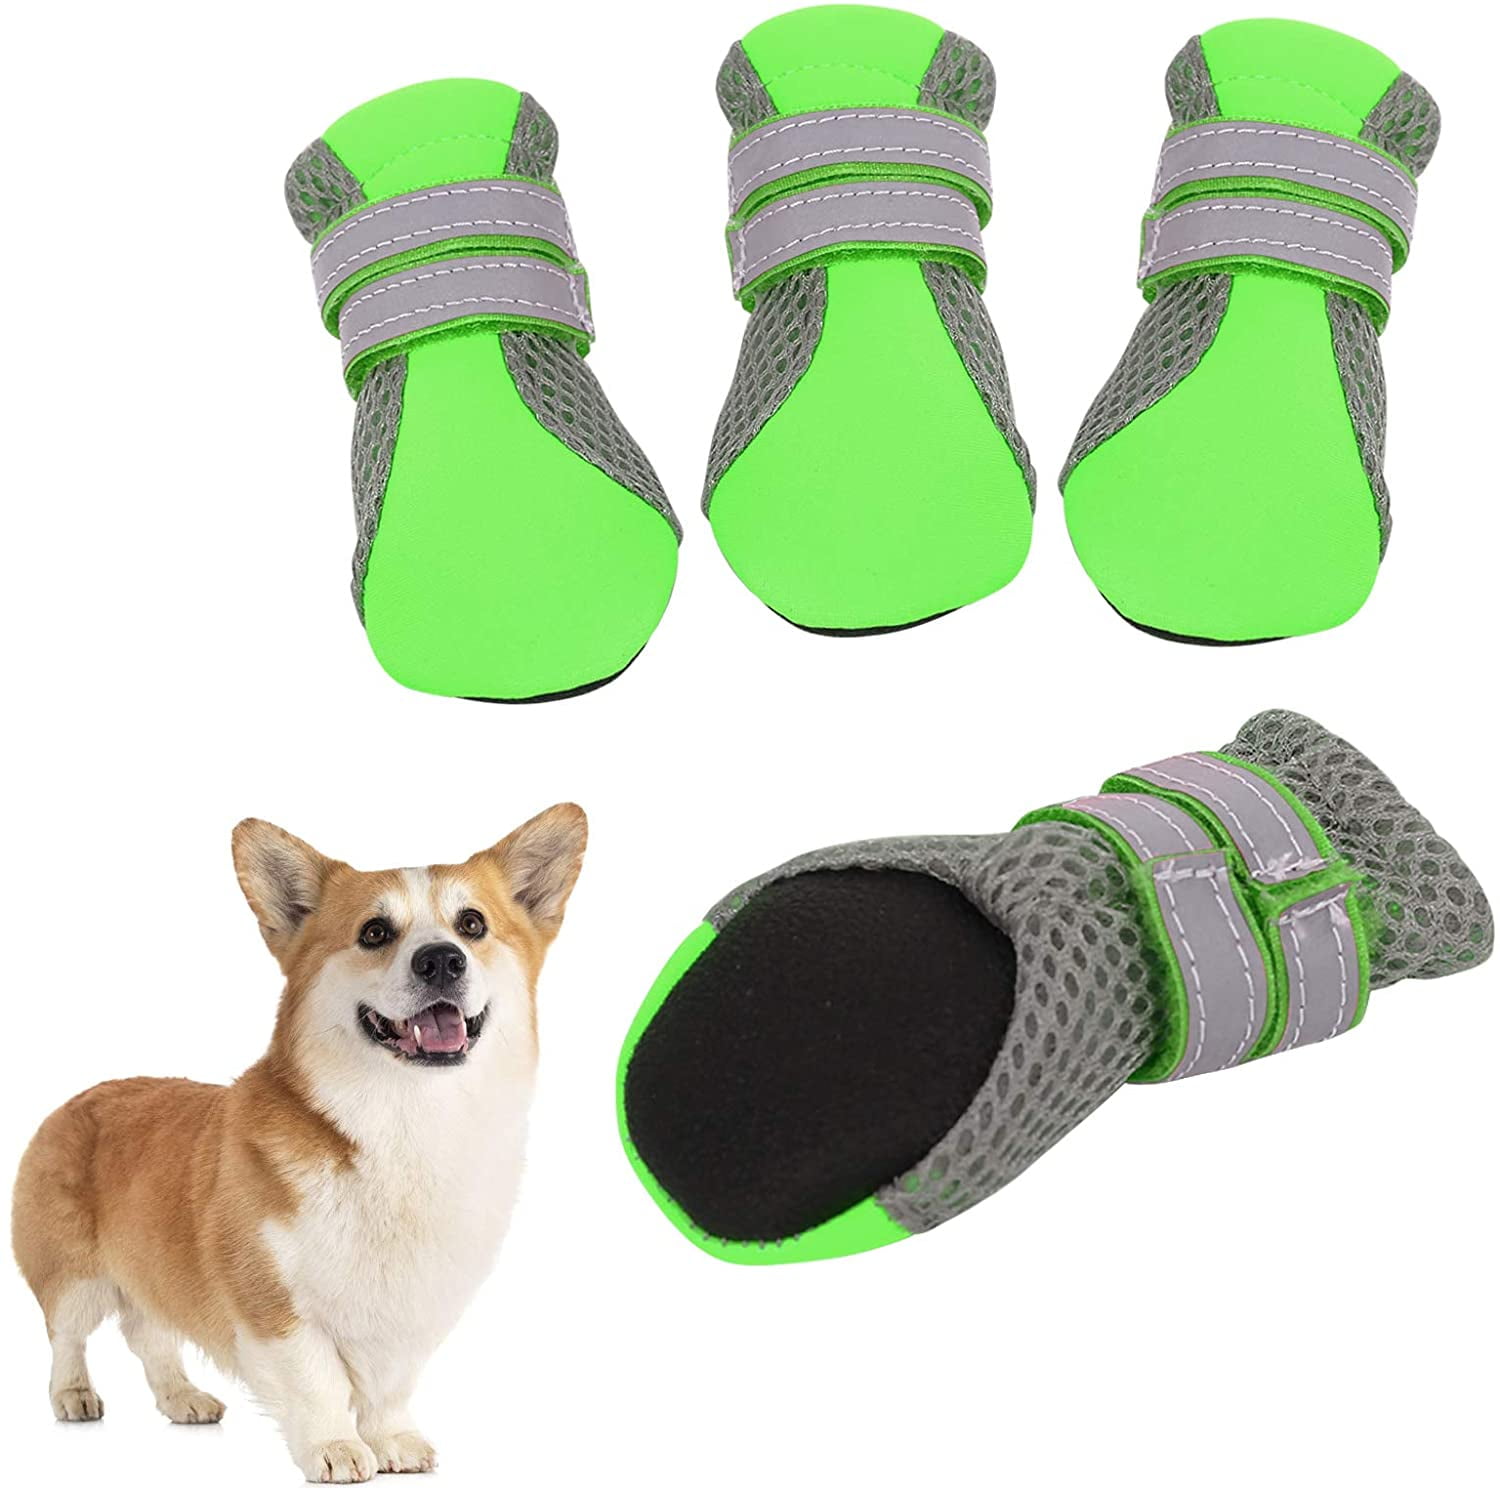 Mesh Dog Boots with Rugged Anti-Slip Sole Dog Shoes for Hot Pavement Summer Dog Booties Breathable Durable with Adjustable & Reflective Straps for Medium Large Dogs Hiking Jogging Backpack 